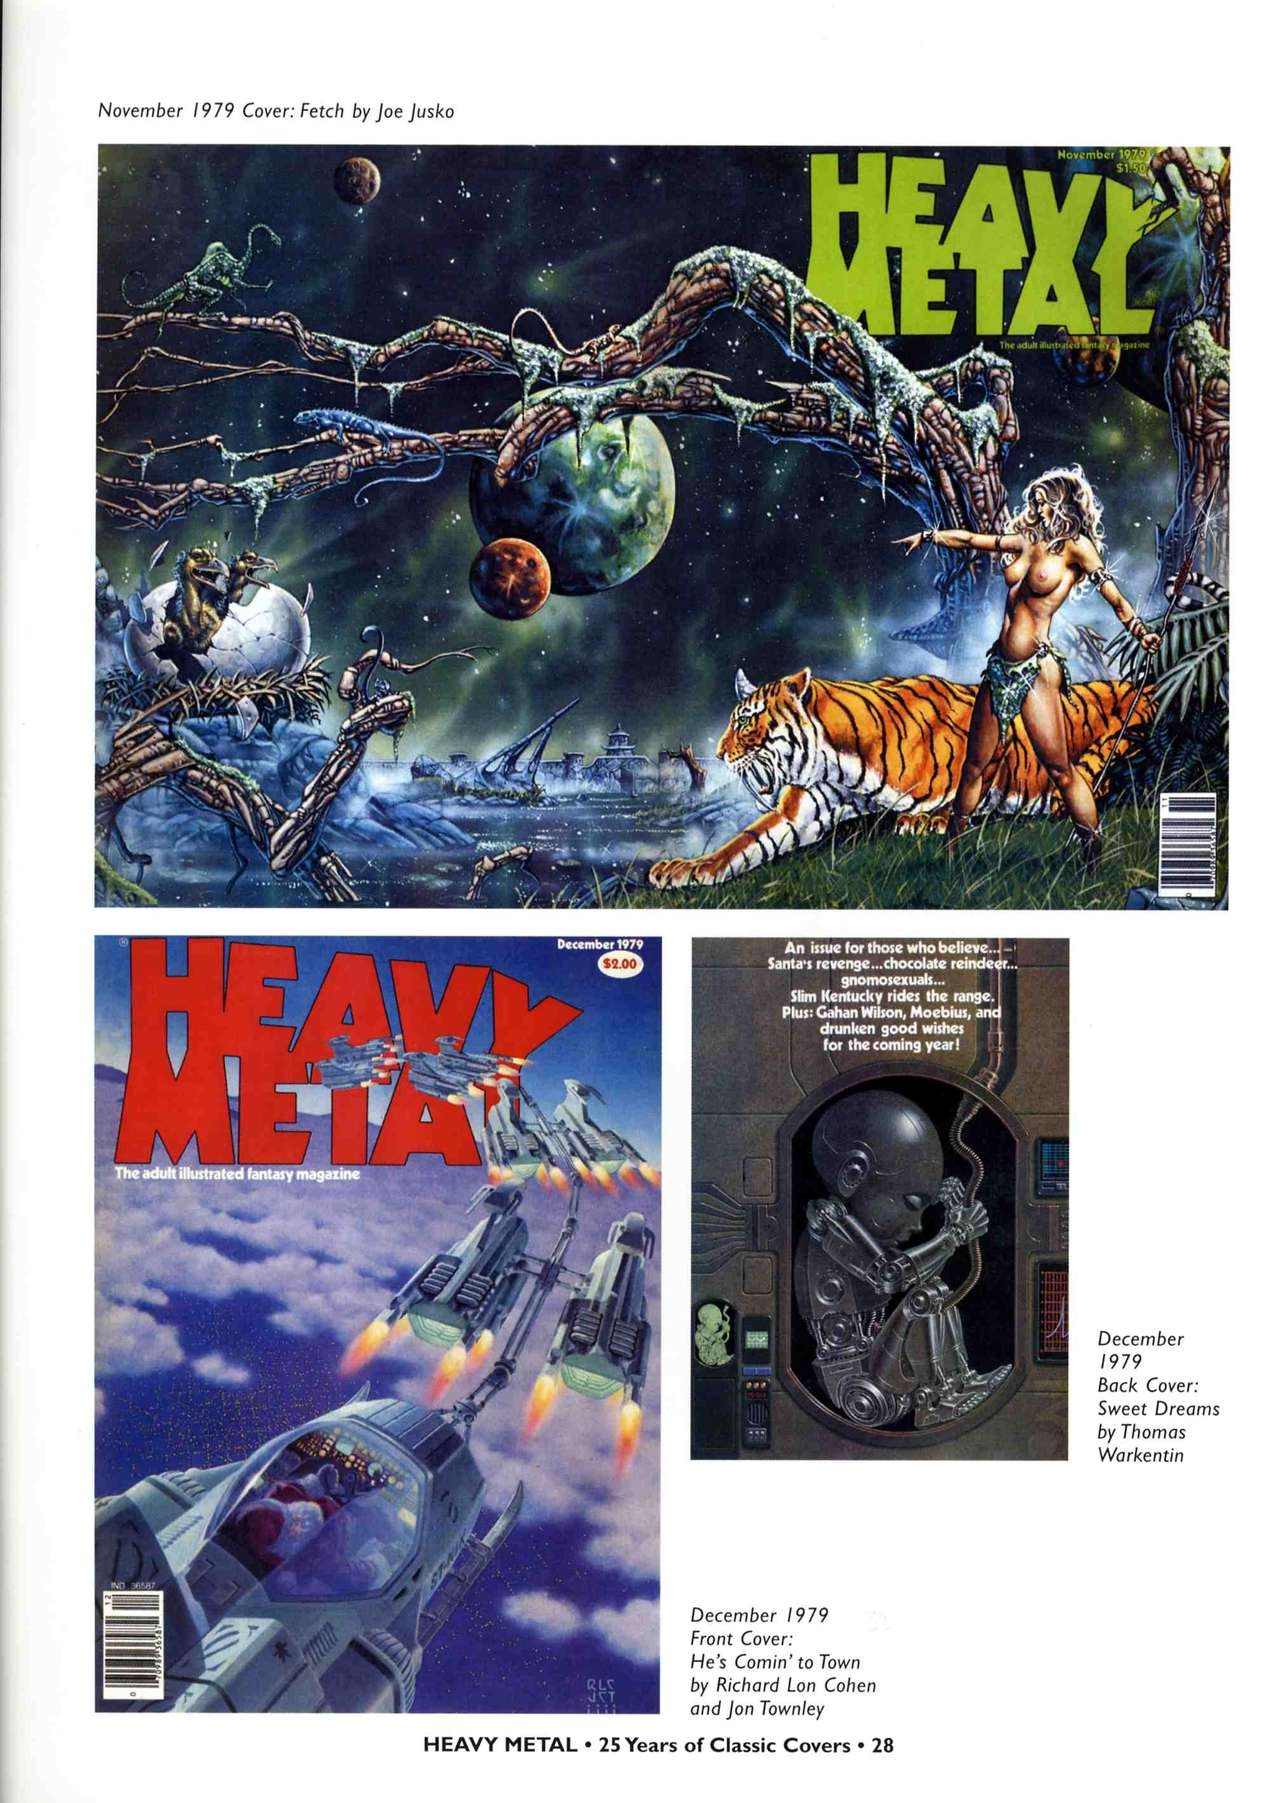 HEAVY METAL 25 Years of Classic Covers 33